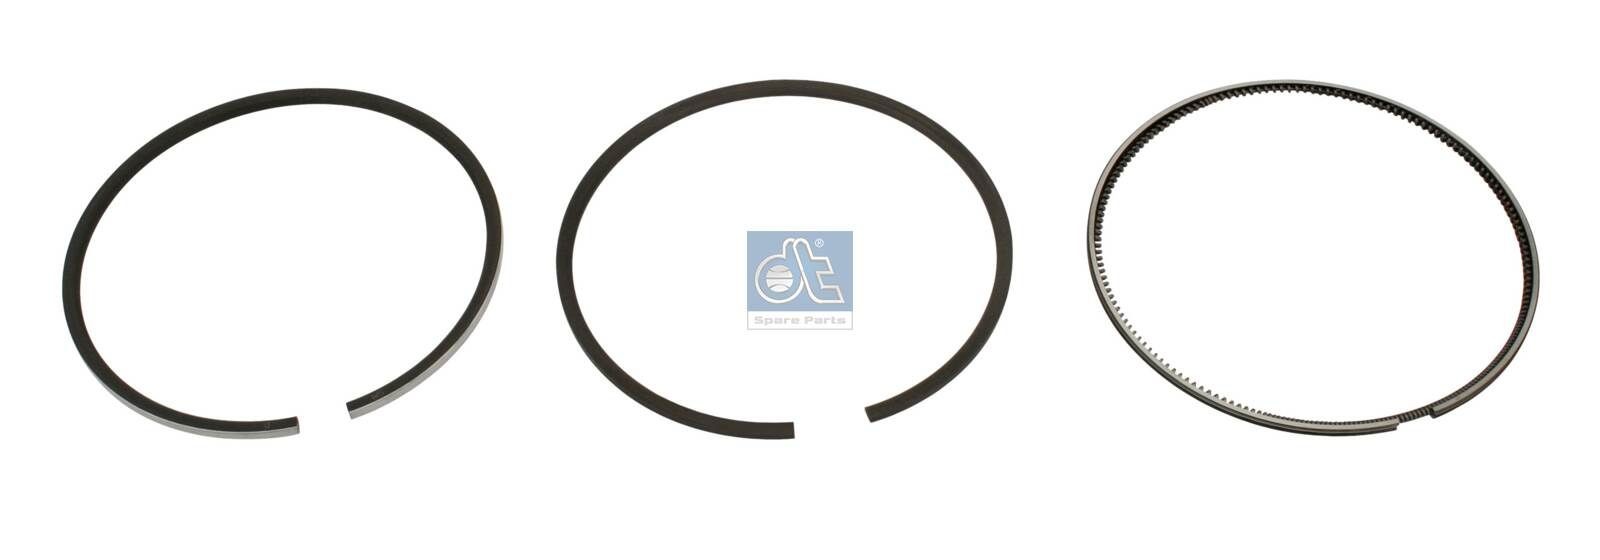 209 50 N0 DT Spare Parts 6.91171 Piston Ring Kit 5010284507